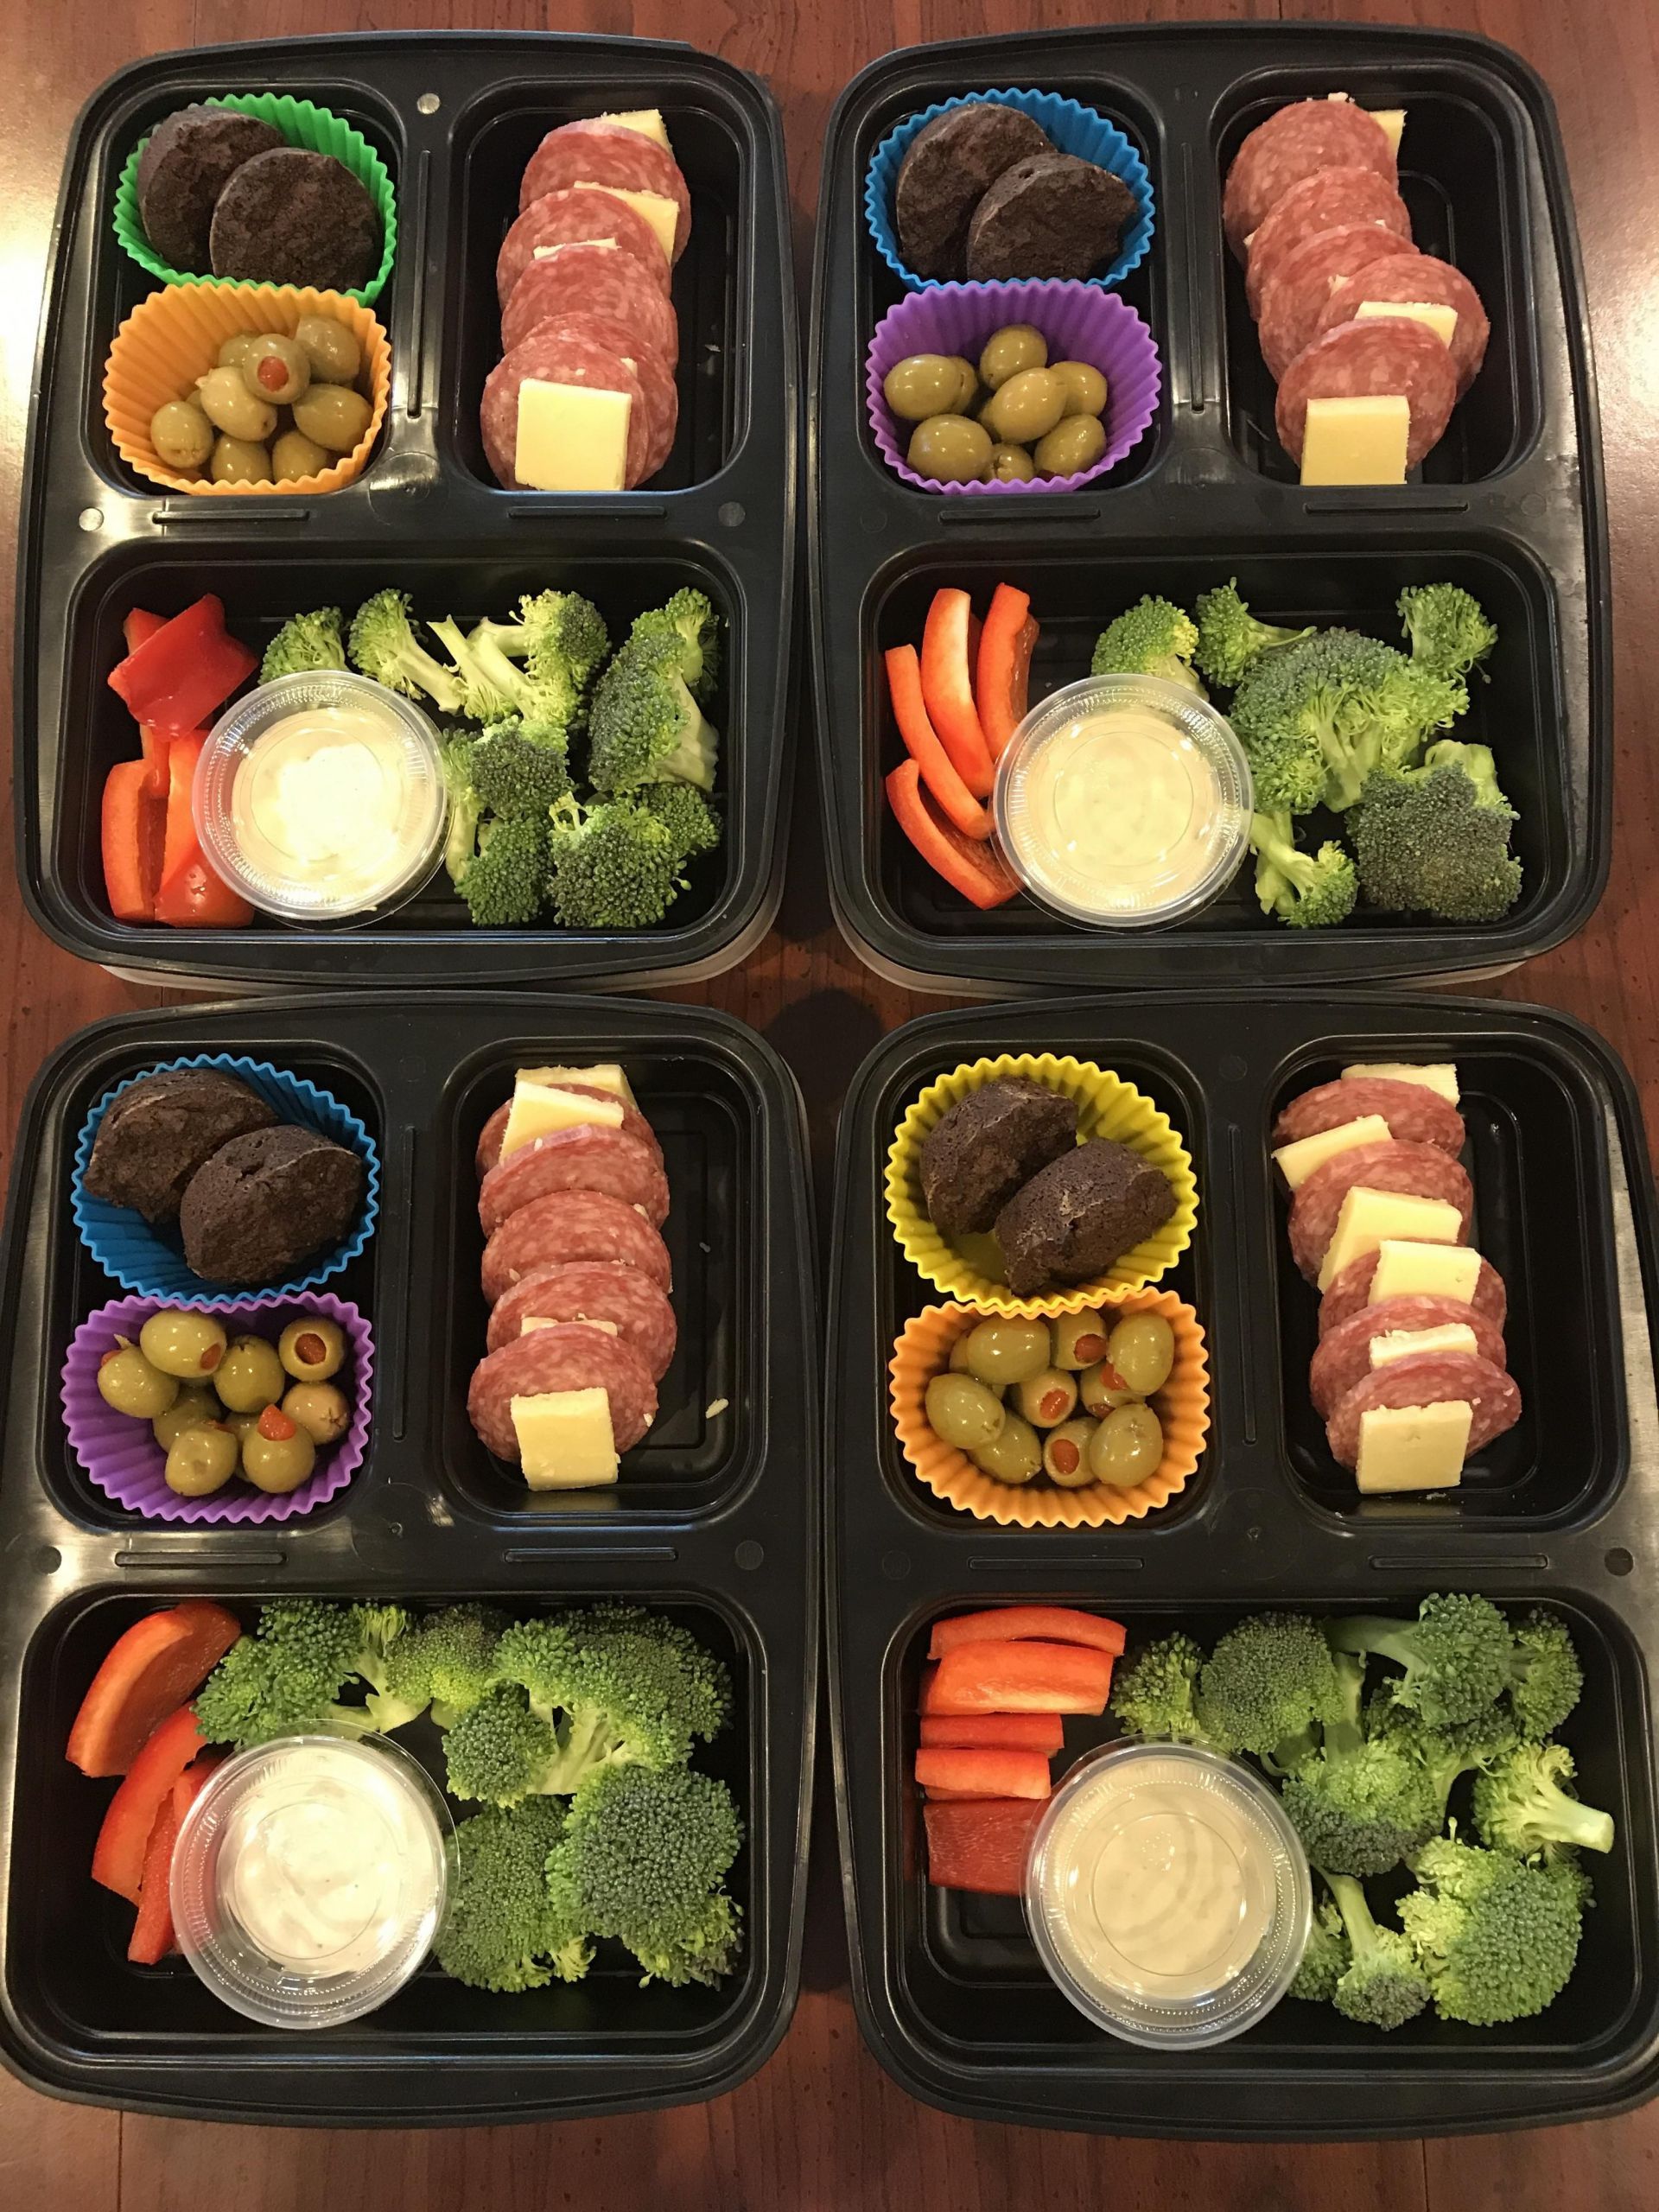 Healthy Keto Meal Prep For The Week
 I made my "adult lunchable" keto friendly